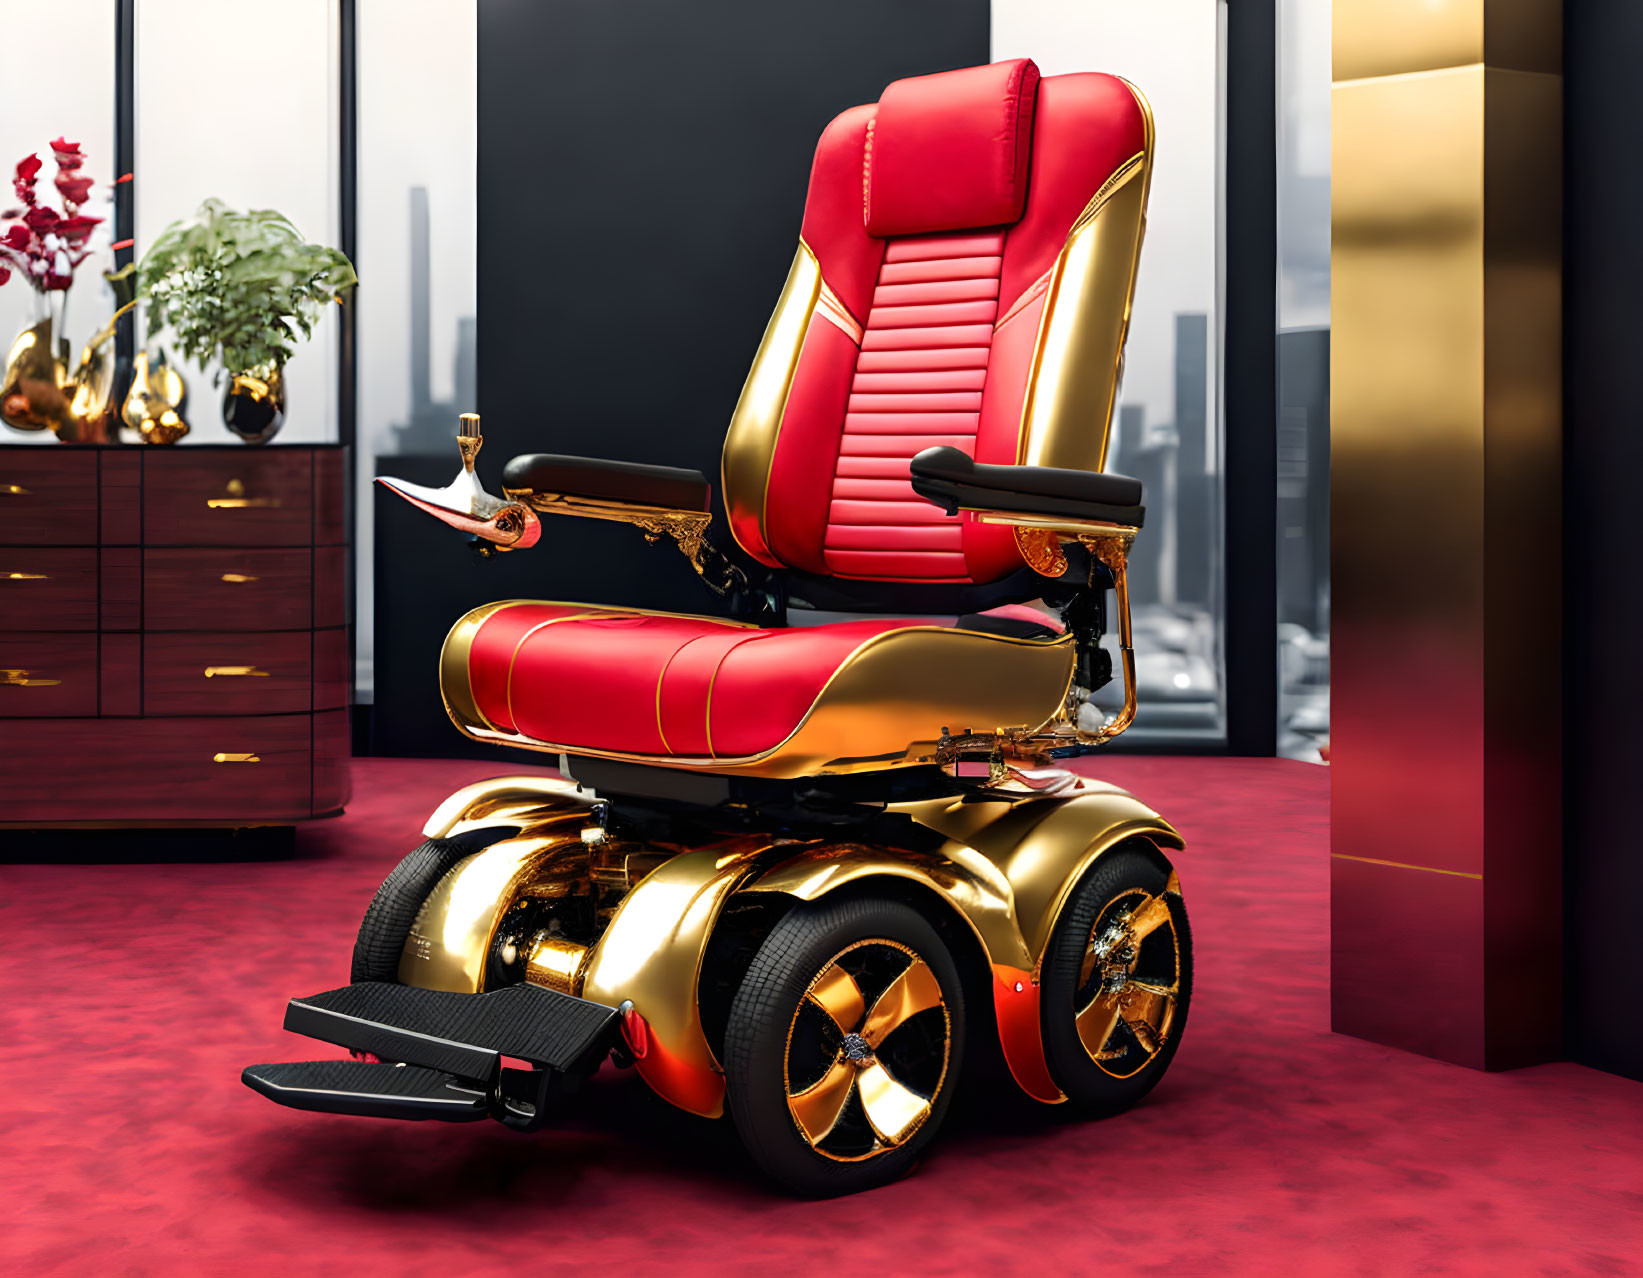 Red and Gold Motorized Wheelchair in Elegant Room with Modern Design